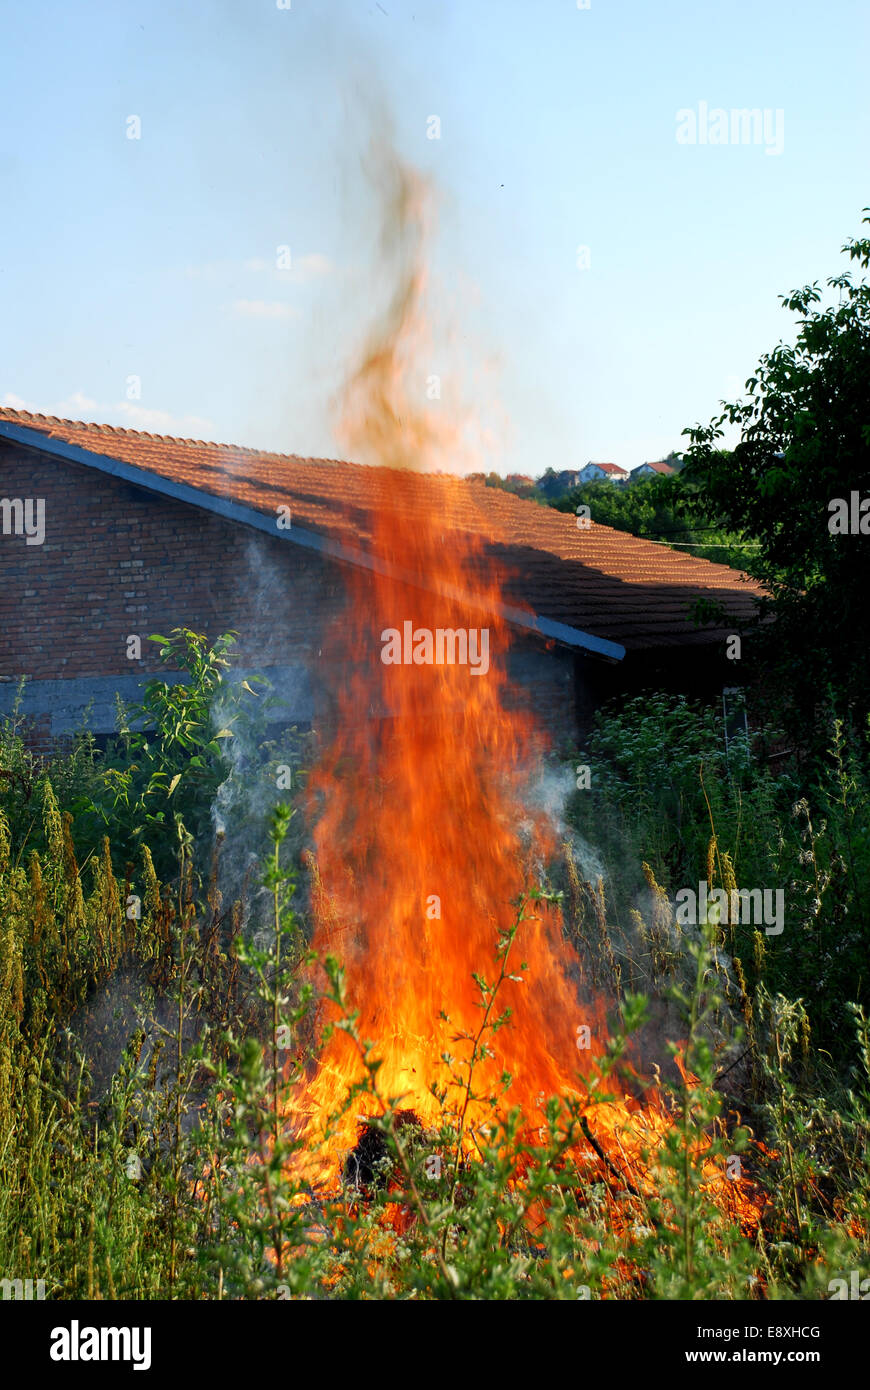 Fire in green grass Stock Photo